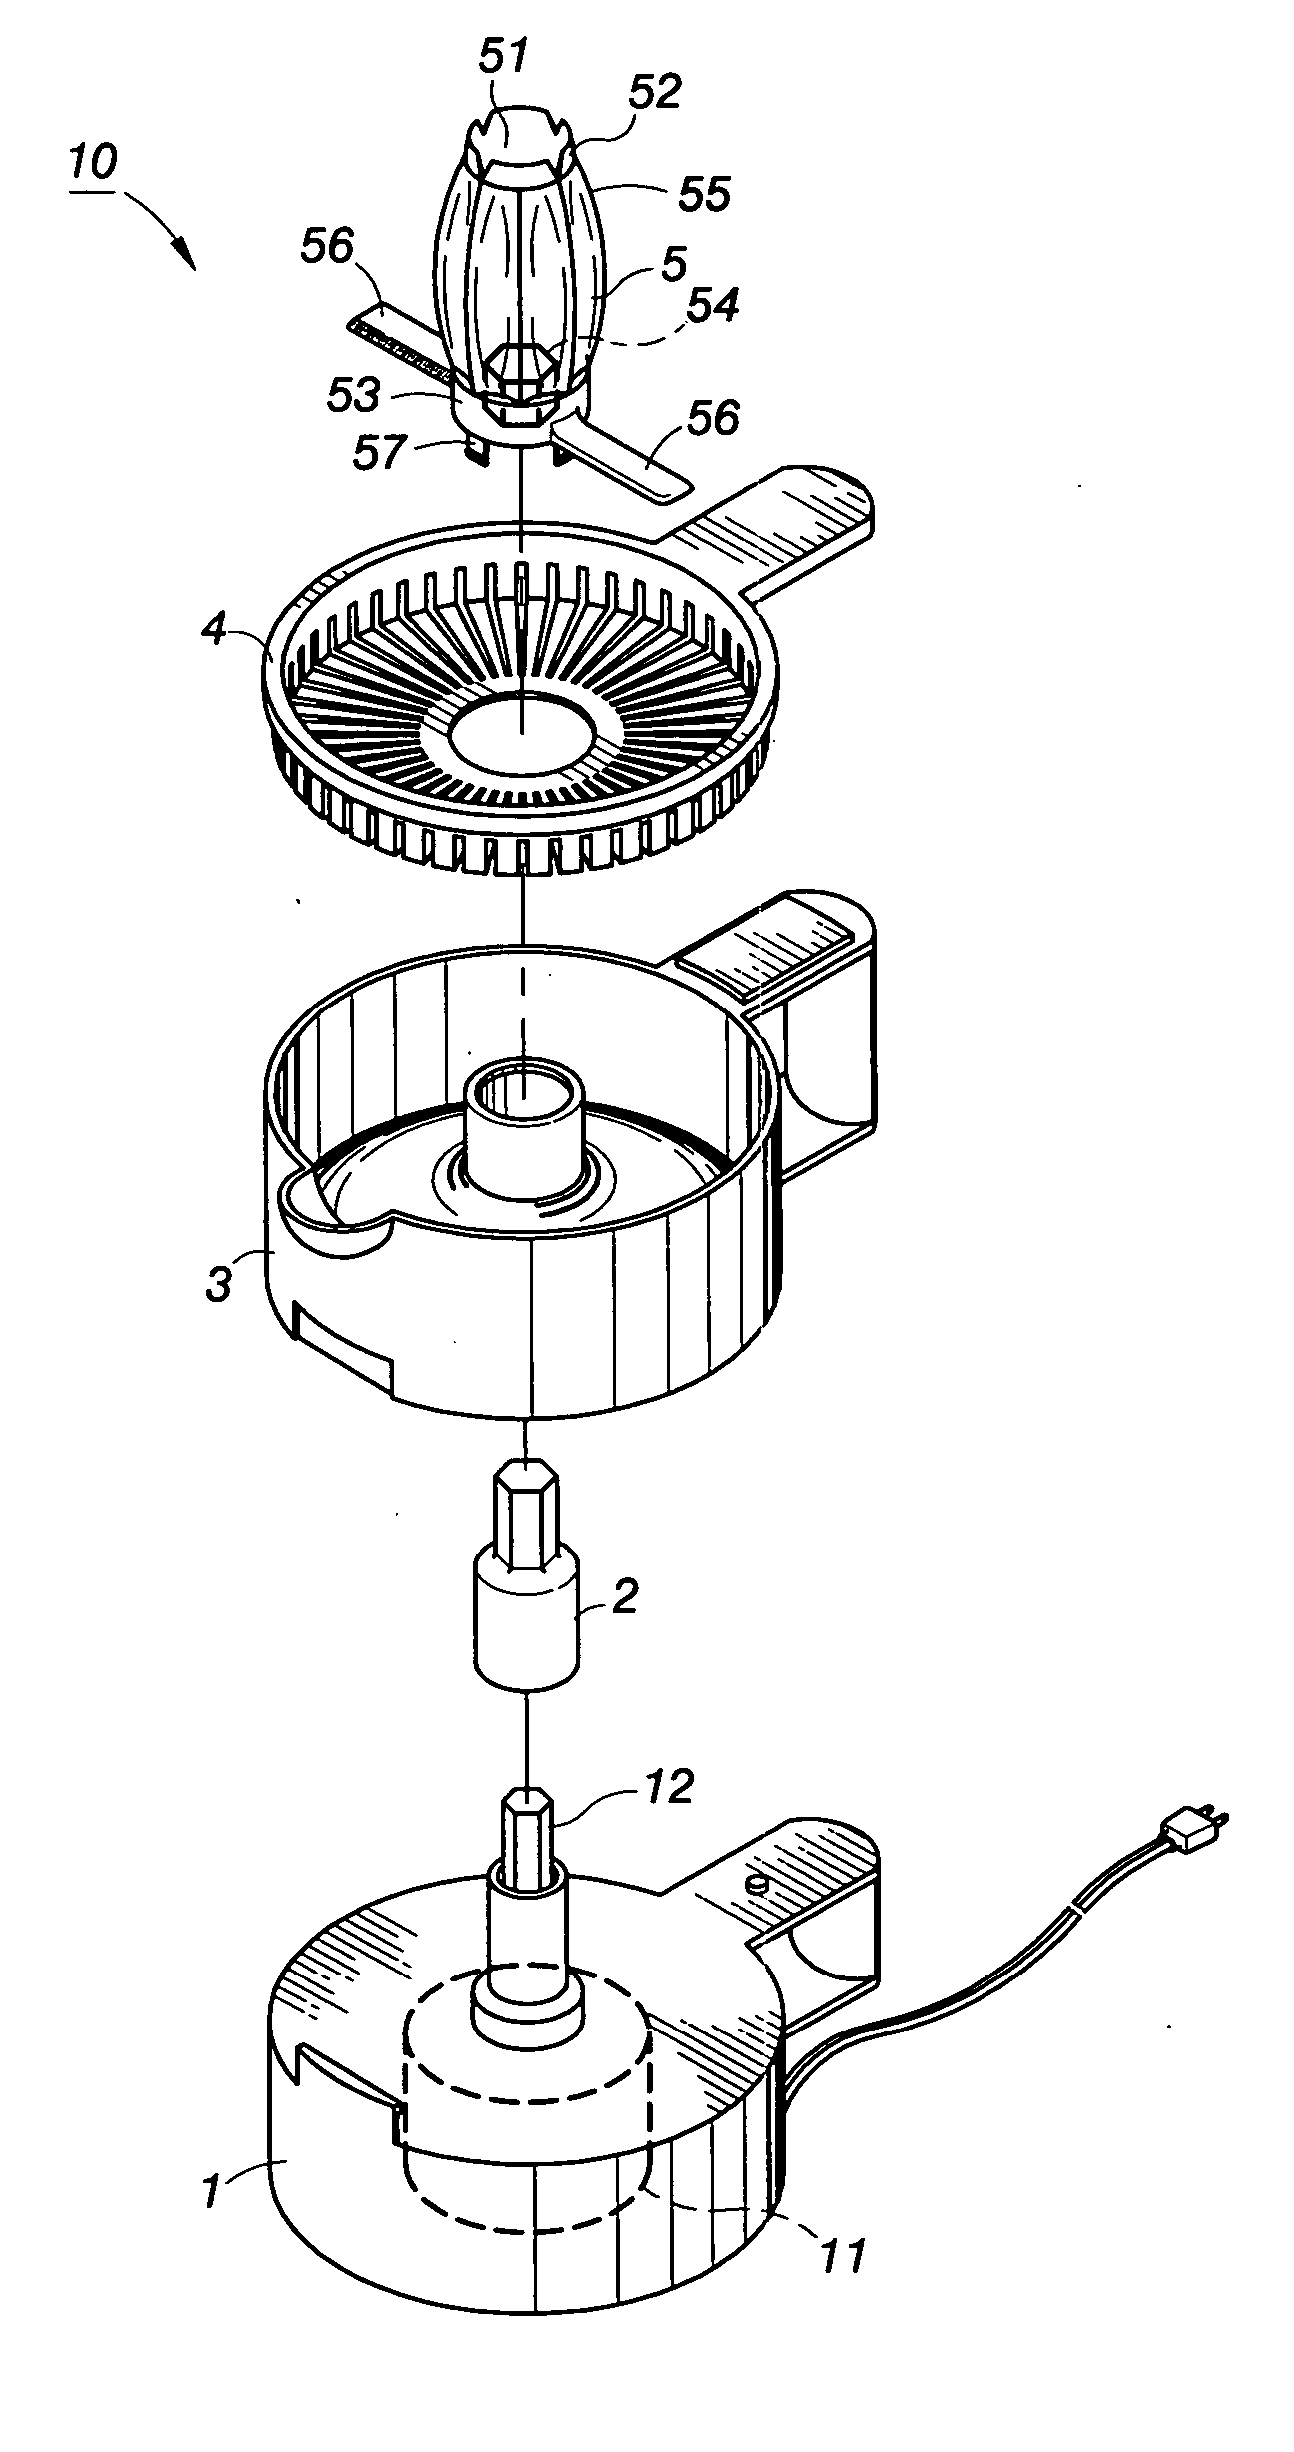 Reamer structure of a juicer